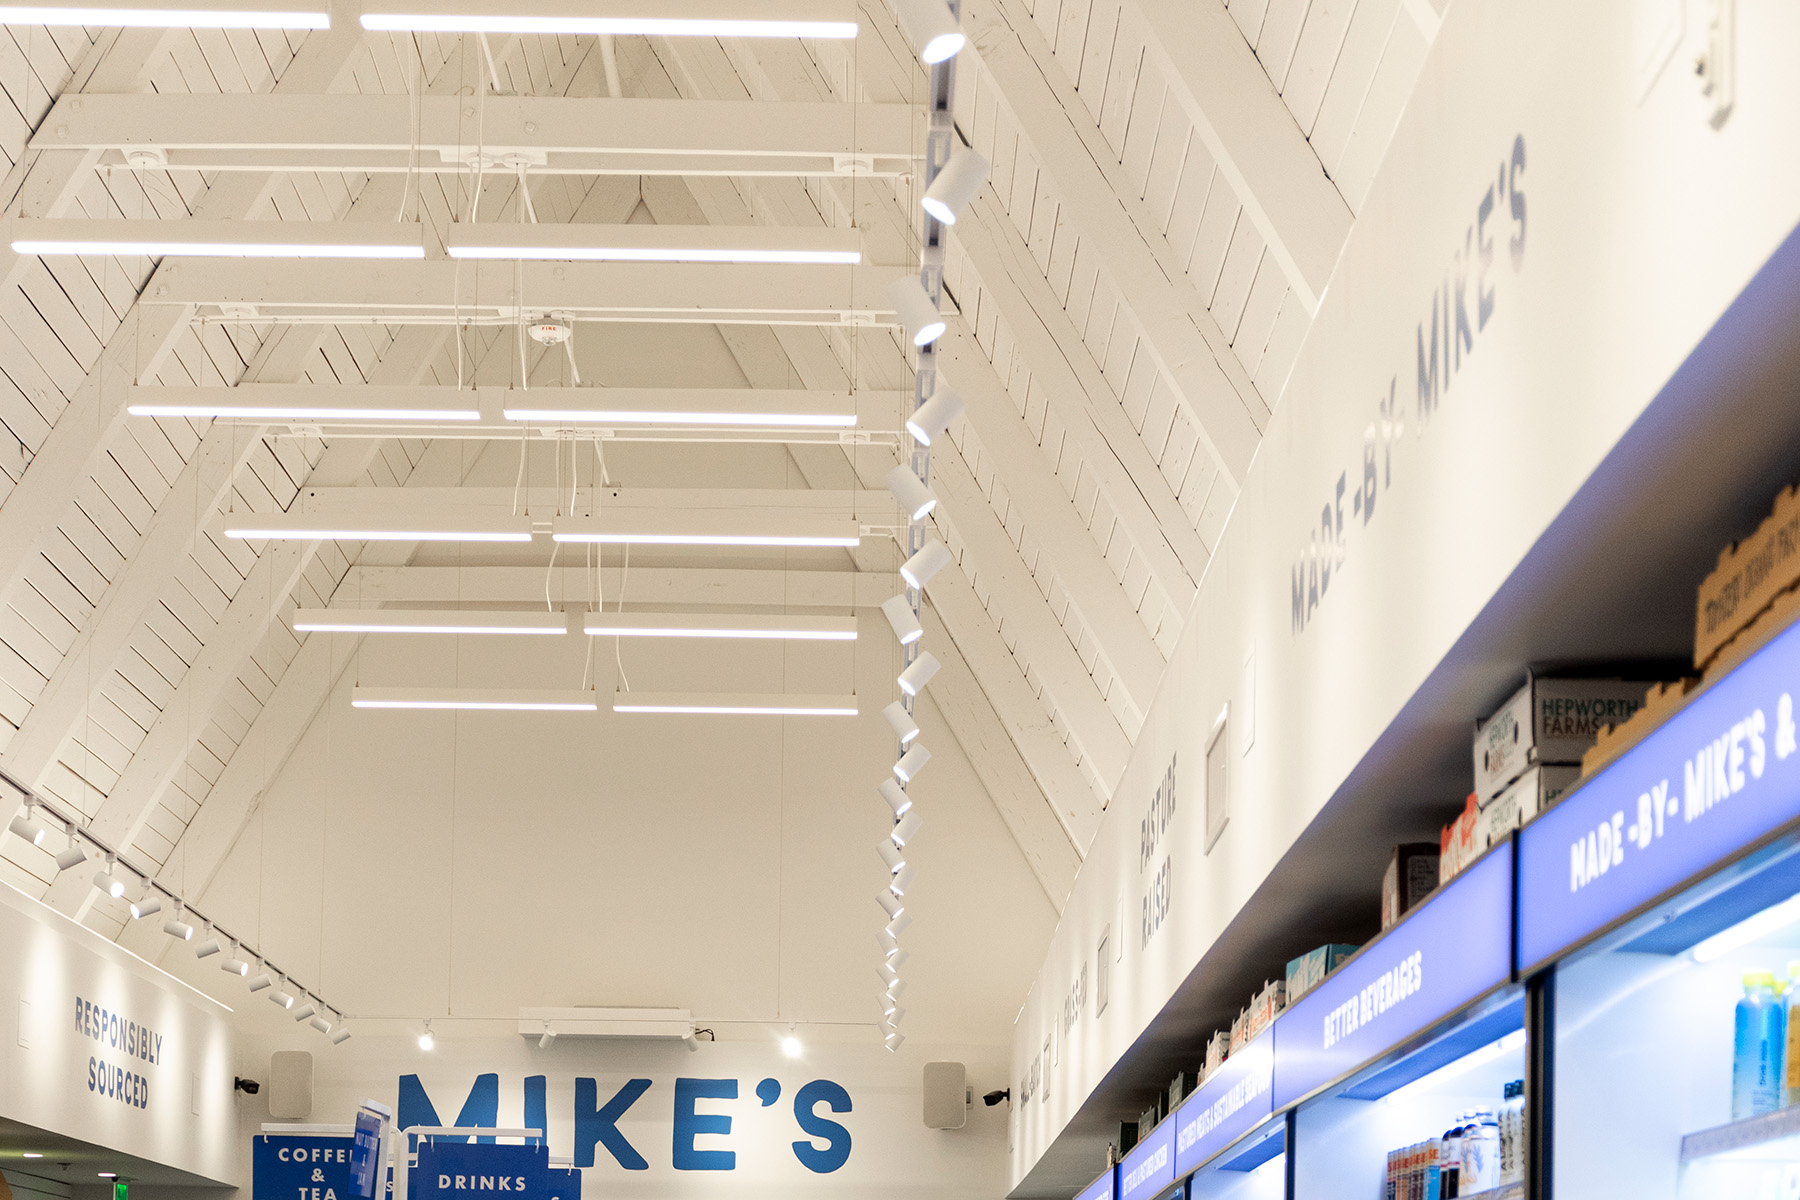 Openshop’s lighting goal with Mike’s Organic was to create a warm, welcoming environment that invites customers to spend time exploring products